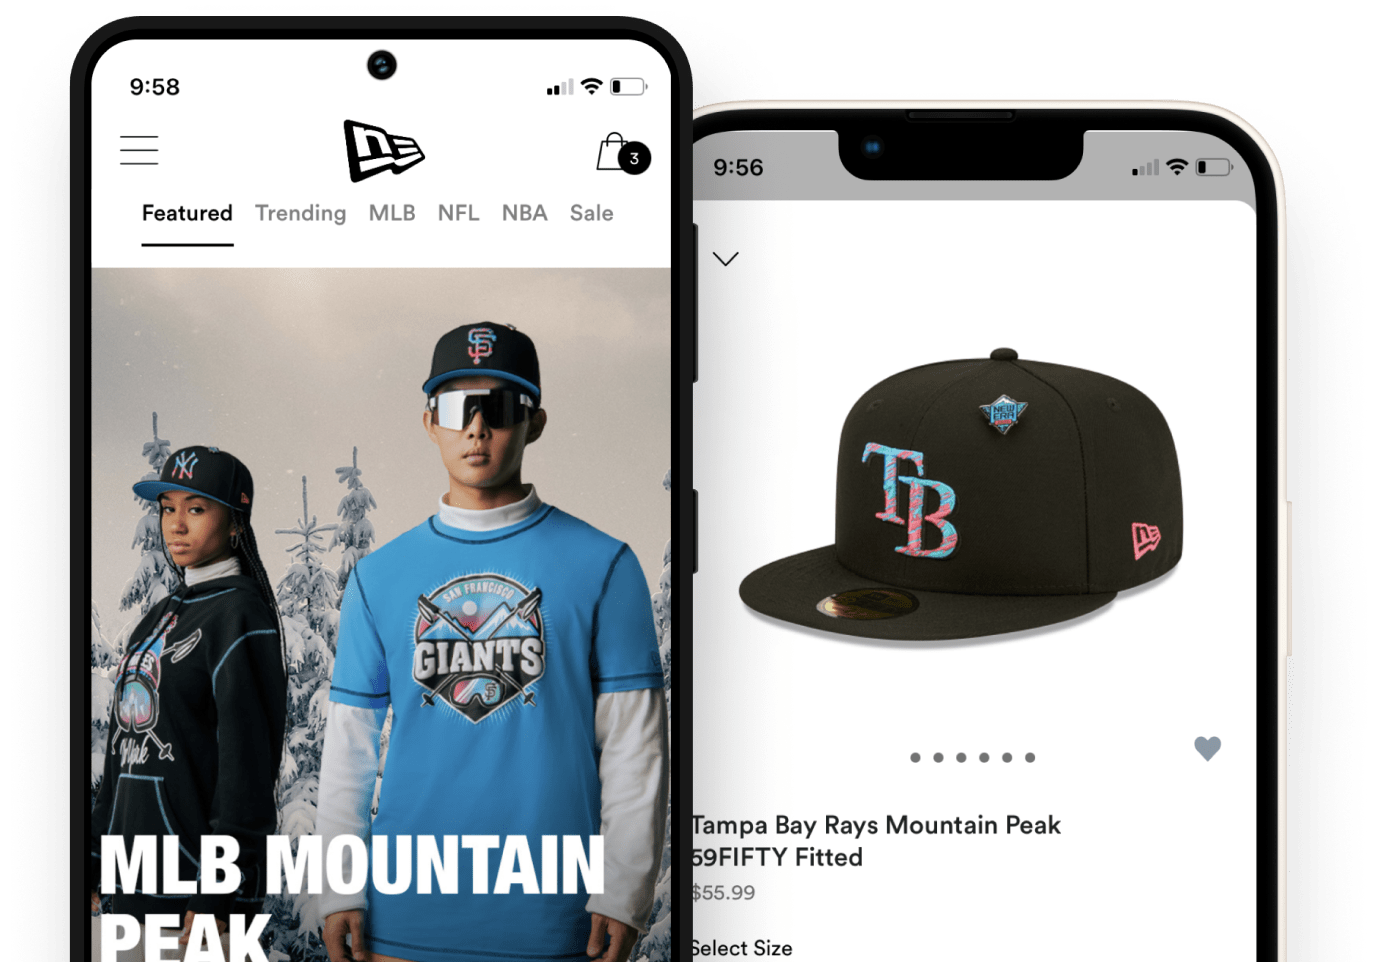 INTRODUCING THE NEW ERA MOBILE APP